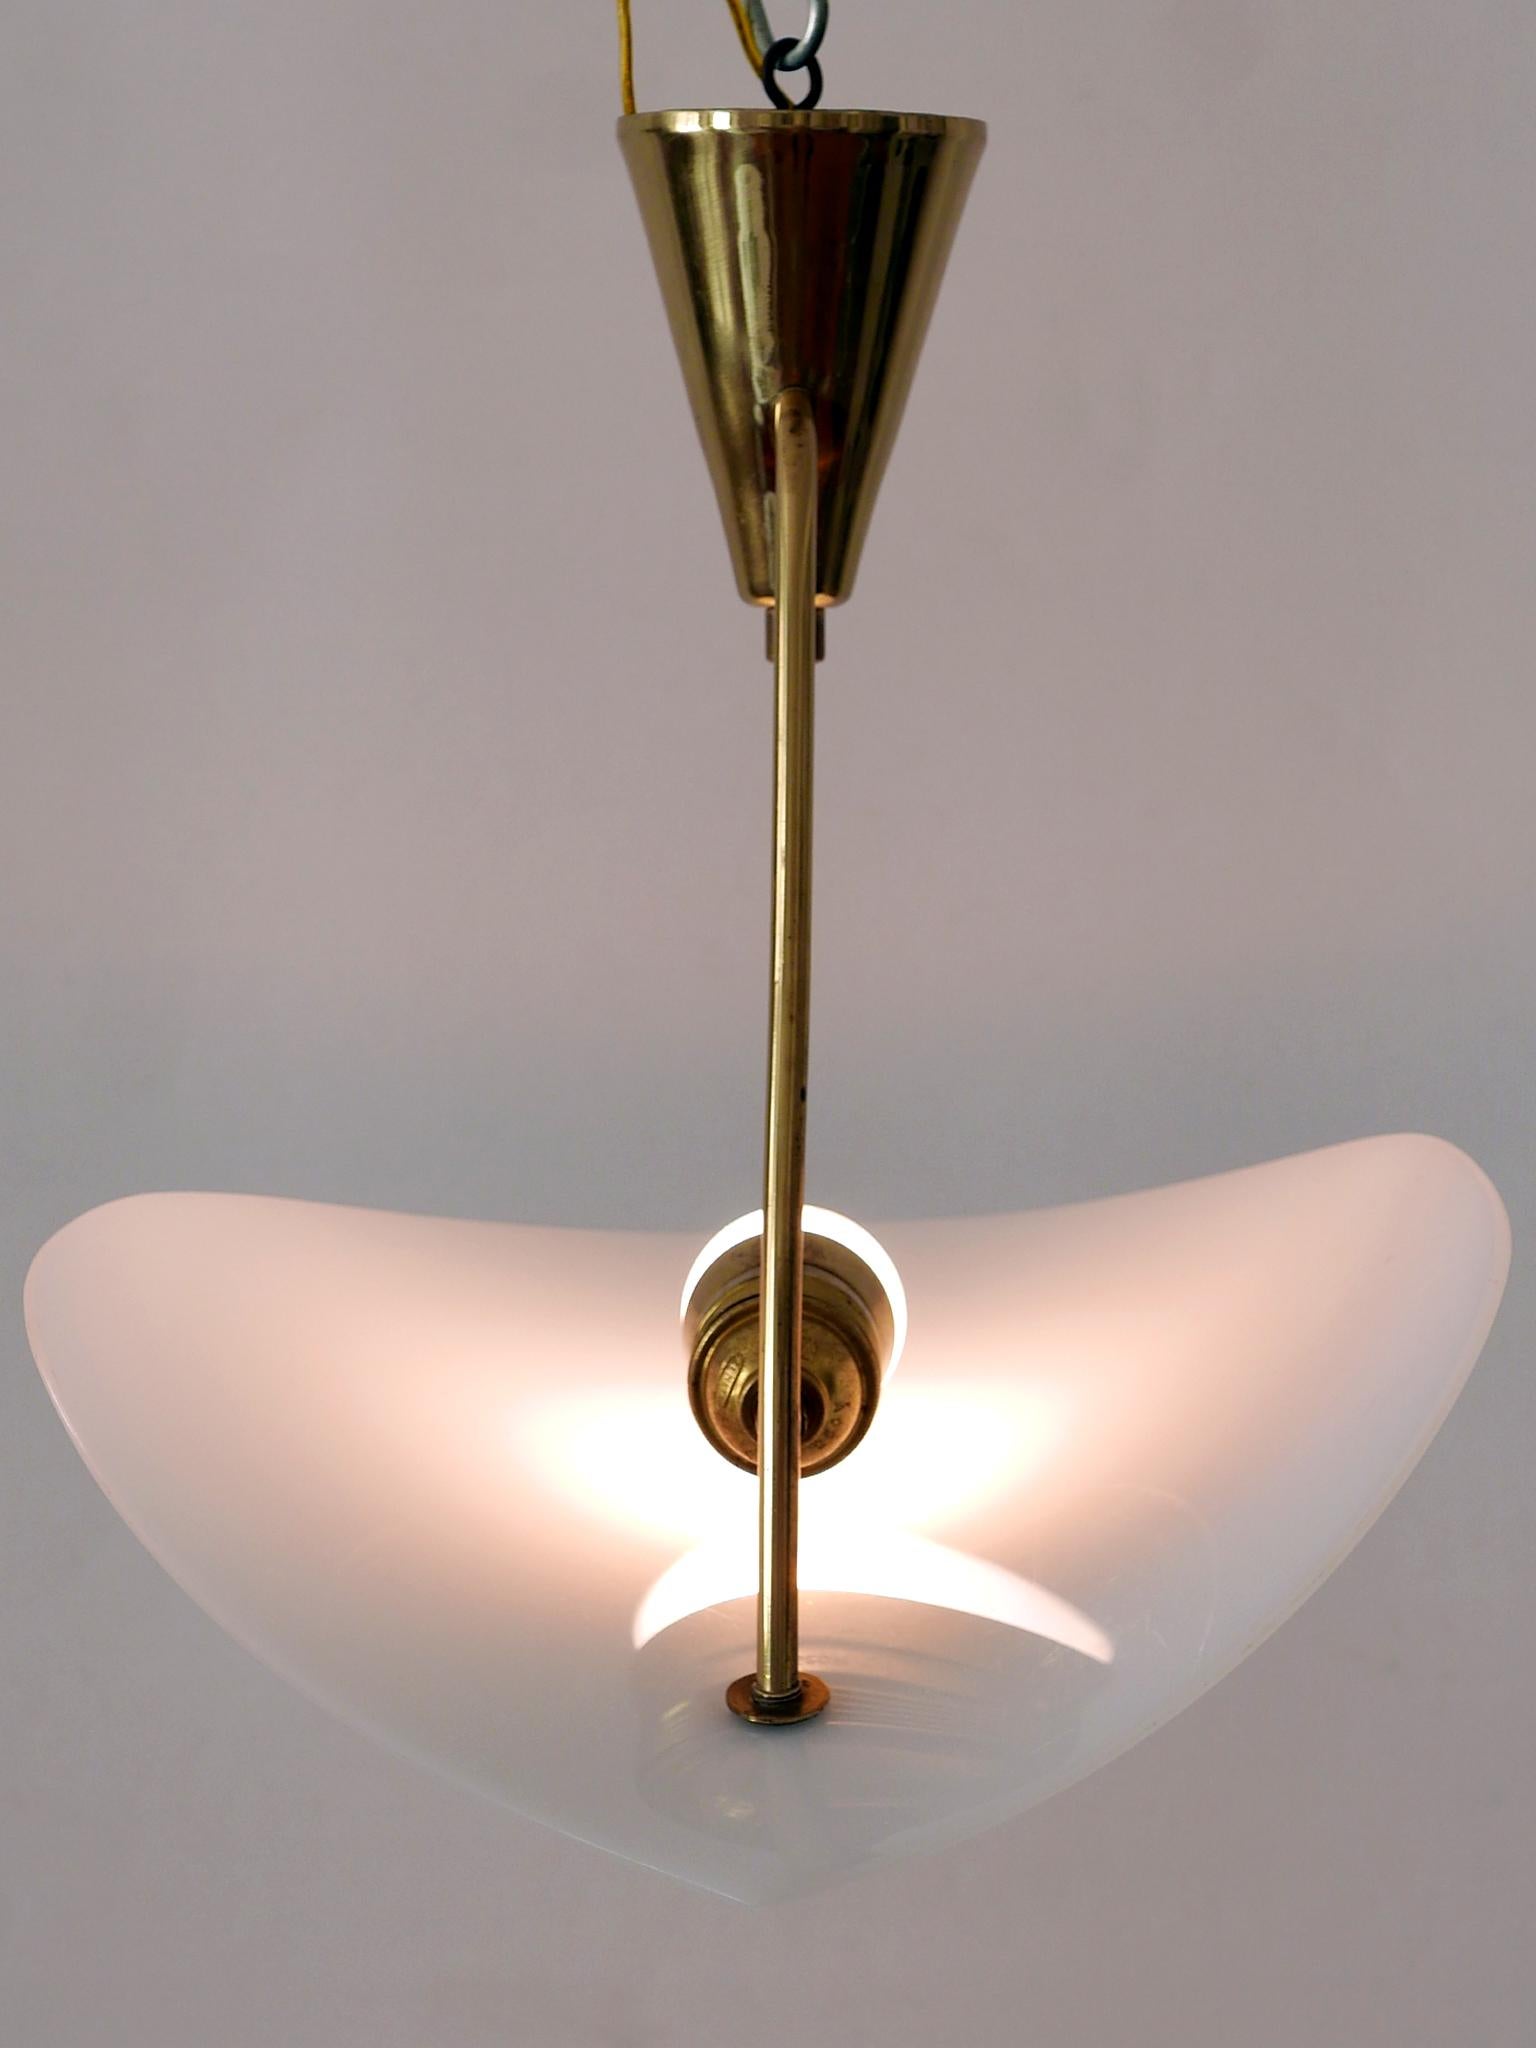 Extremely Rare and Elegant Lucite & Brass Ceiling Lamp Germany 1960s For Sale 8